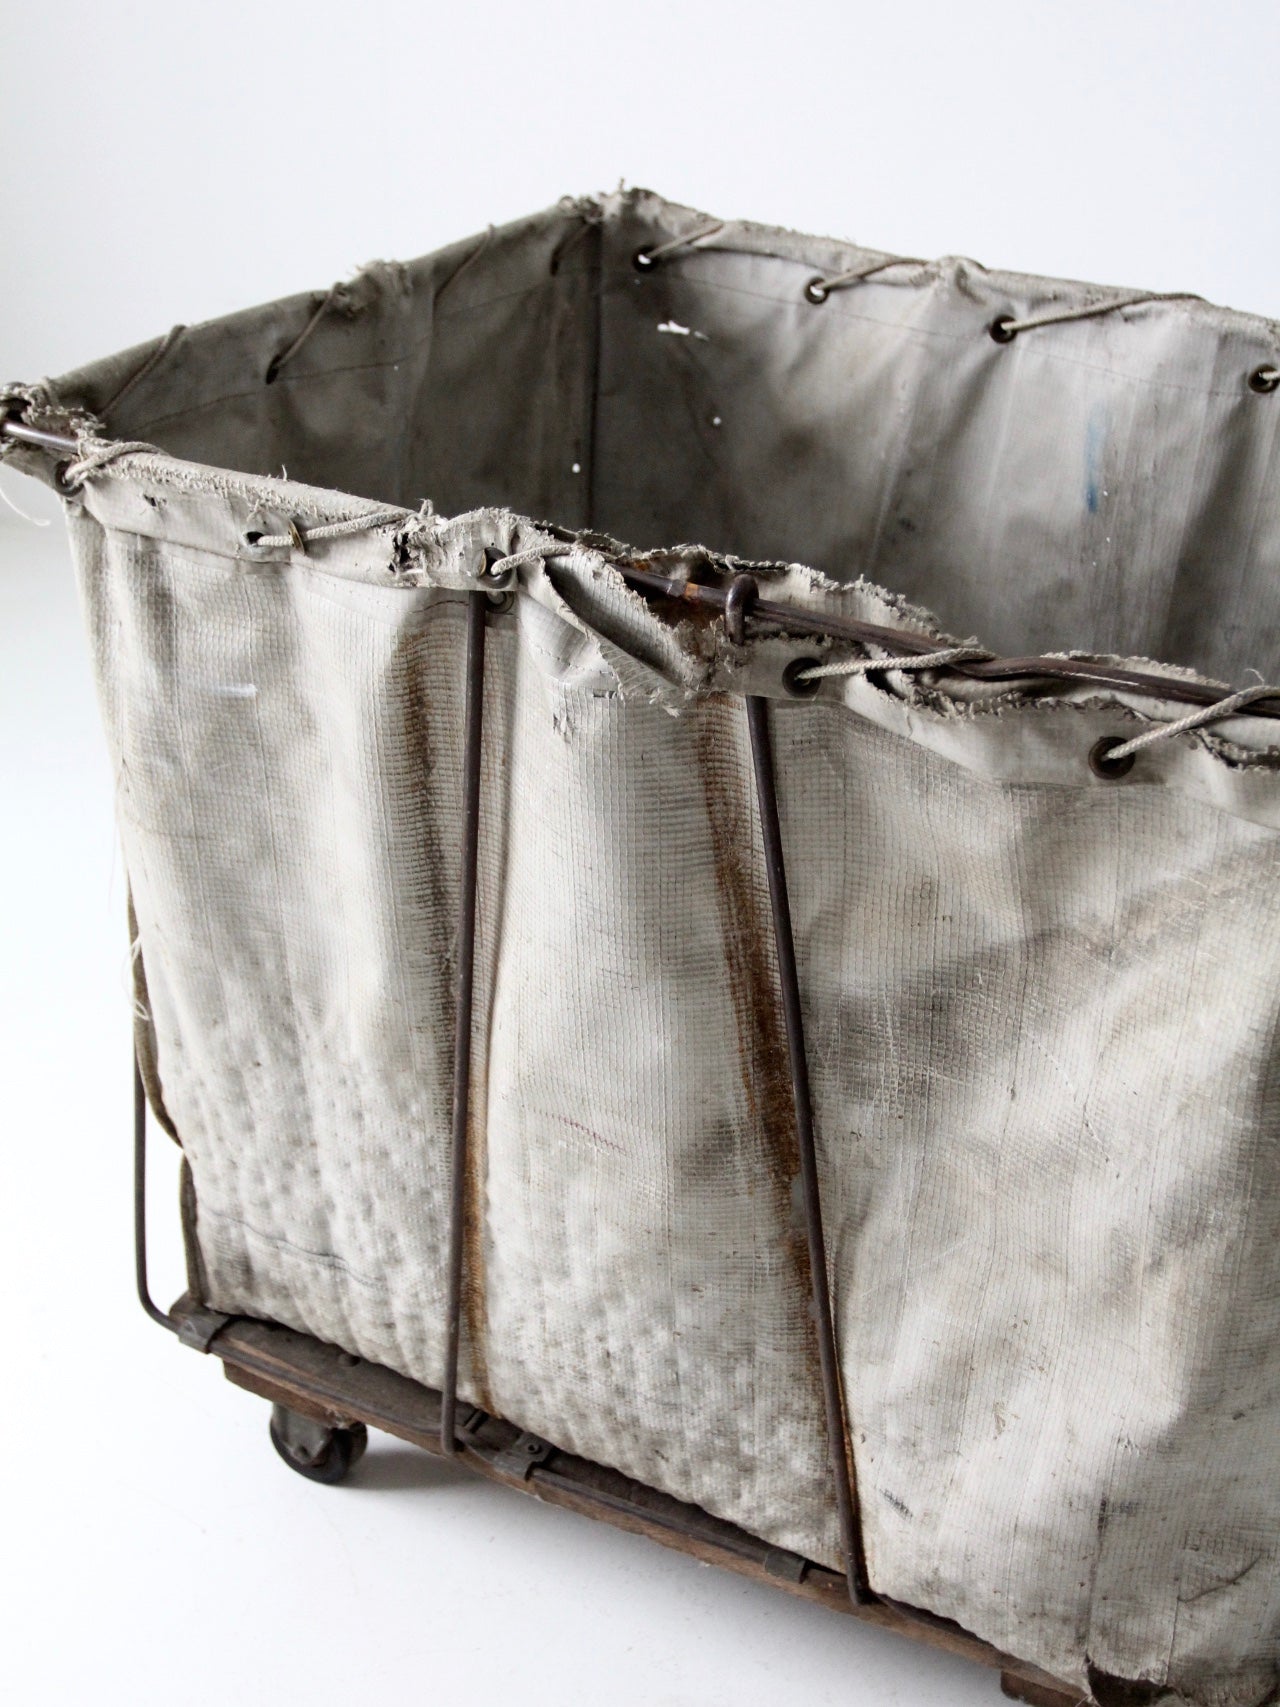 vintage industrial laundry cart